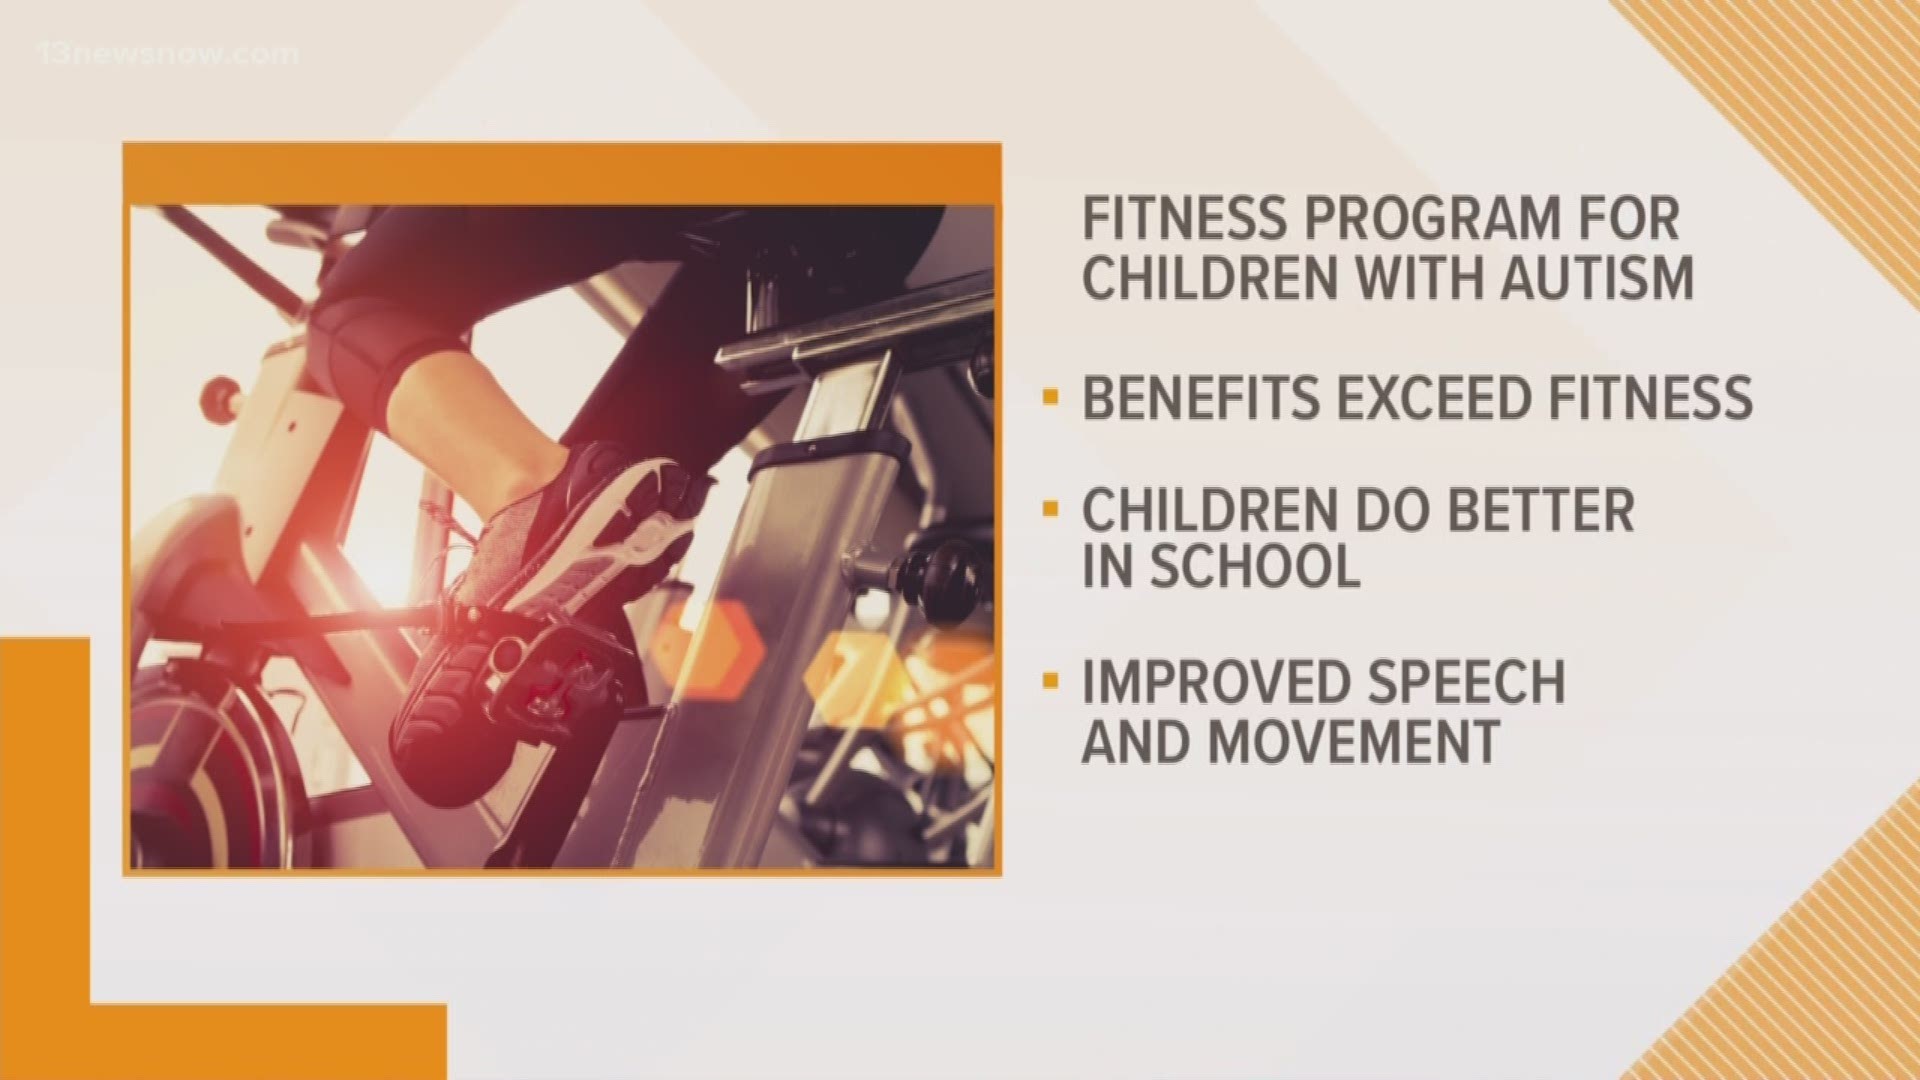 With the New Year, many people are making exercise a priority for themselves and their children. Everyone can benefit from exercise.